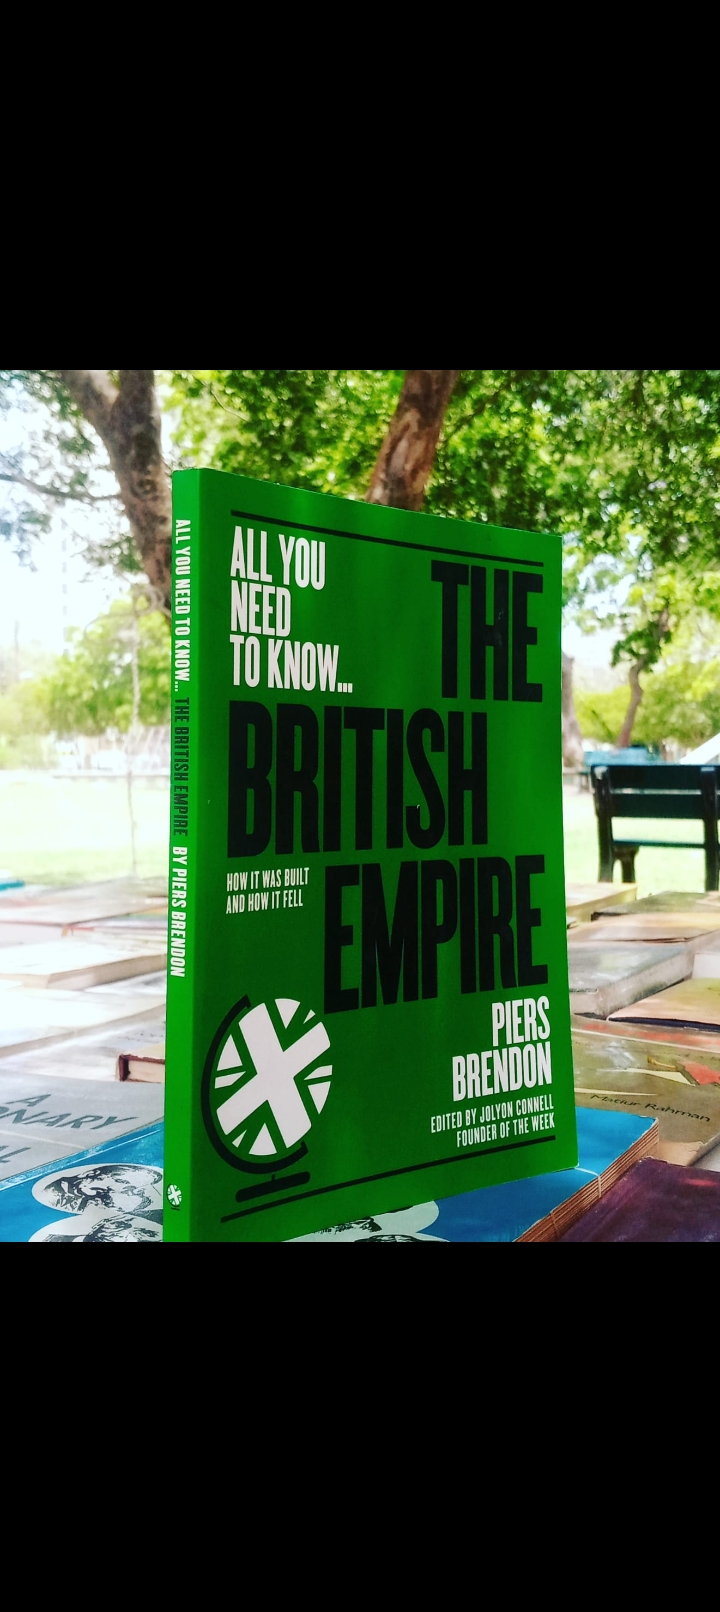 all you need to know the british empire by piersbrendon. original new paperback